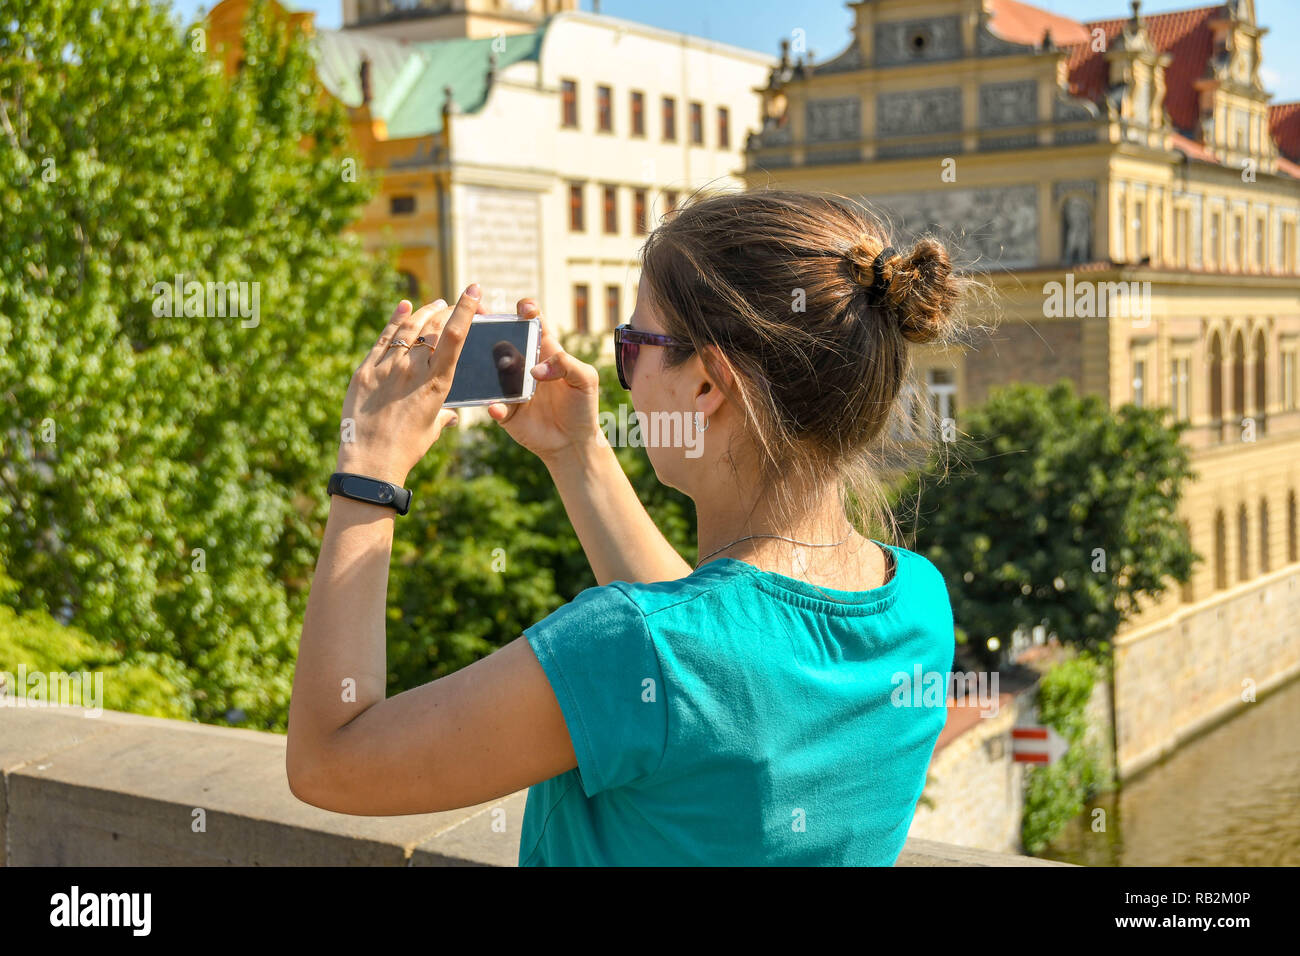 PRAGUE, CZECH REPUBLIC - JULY 2018: Person in Prague city centre taking a picture on a camera phone. Stock Photo